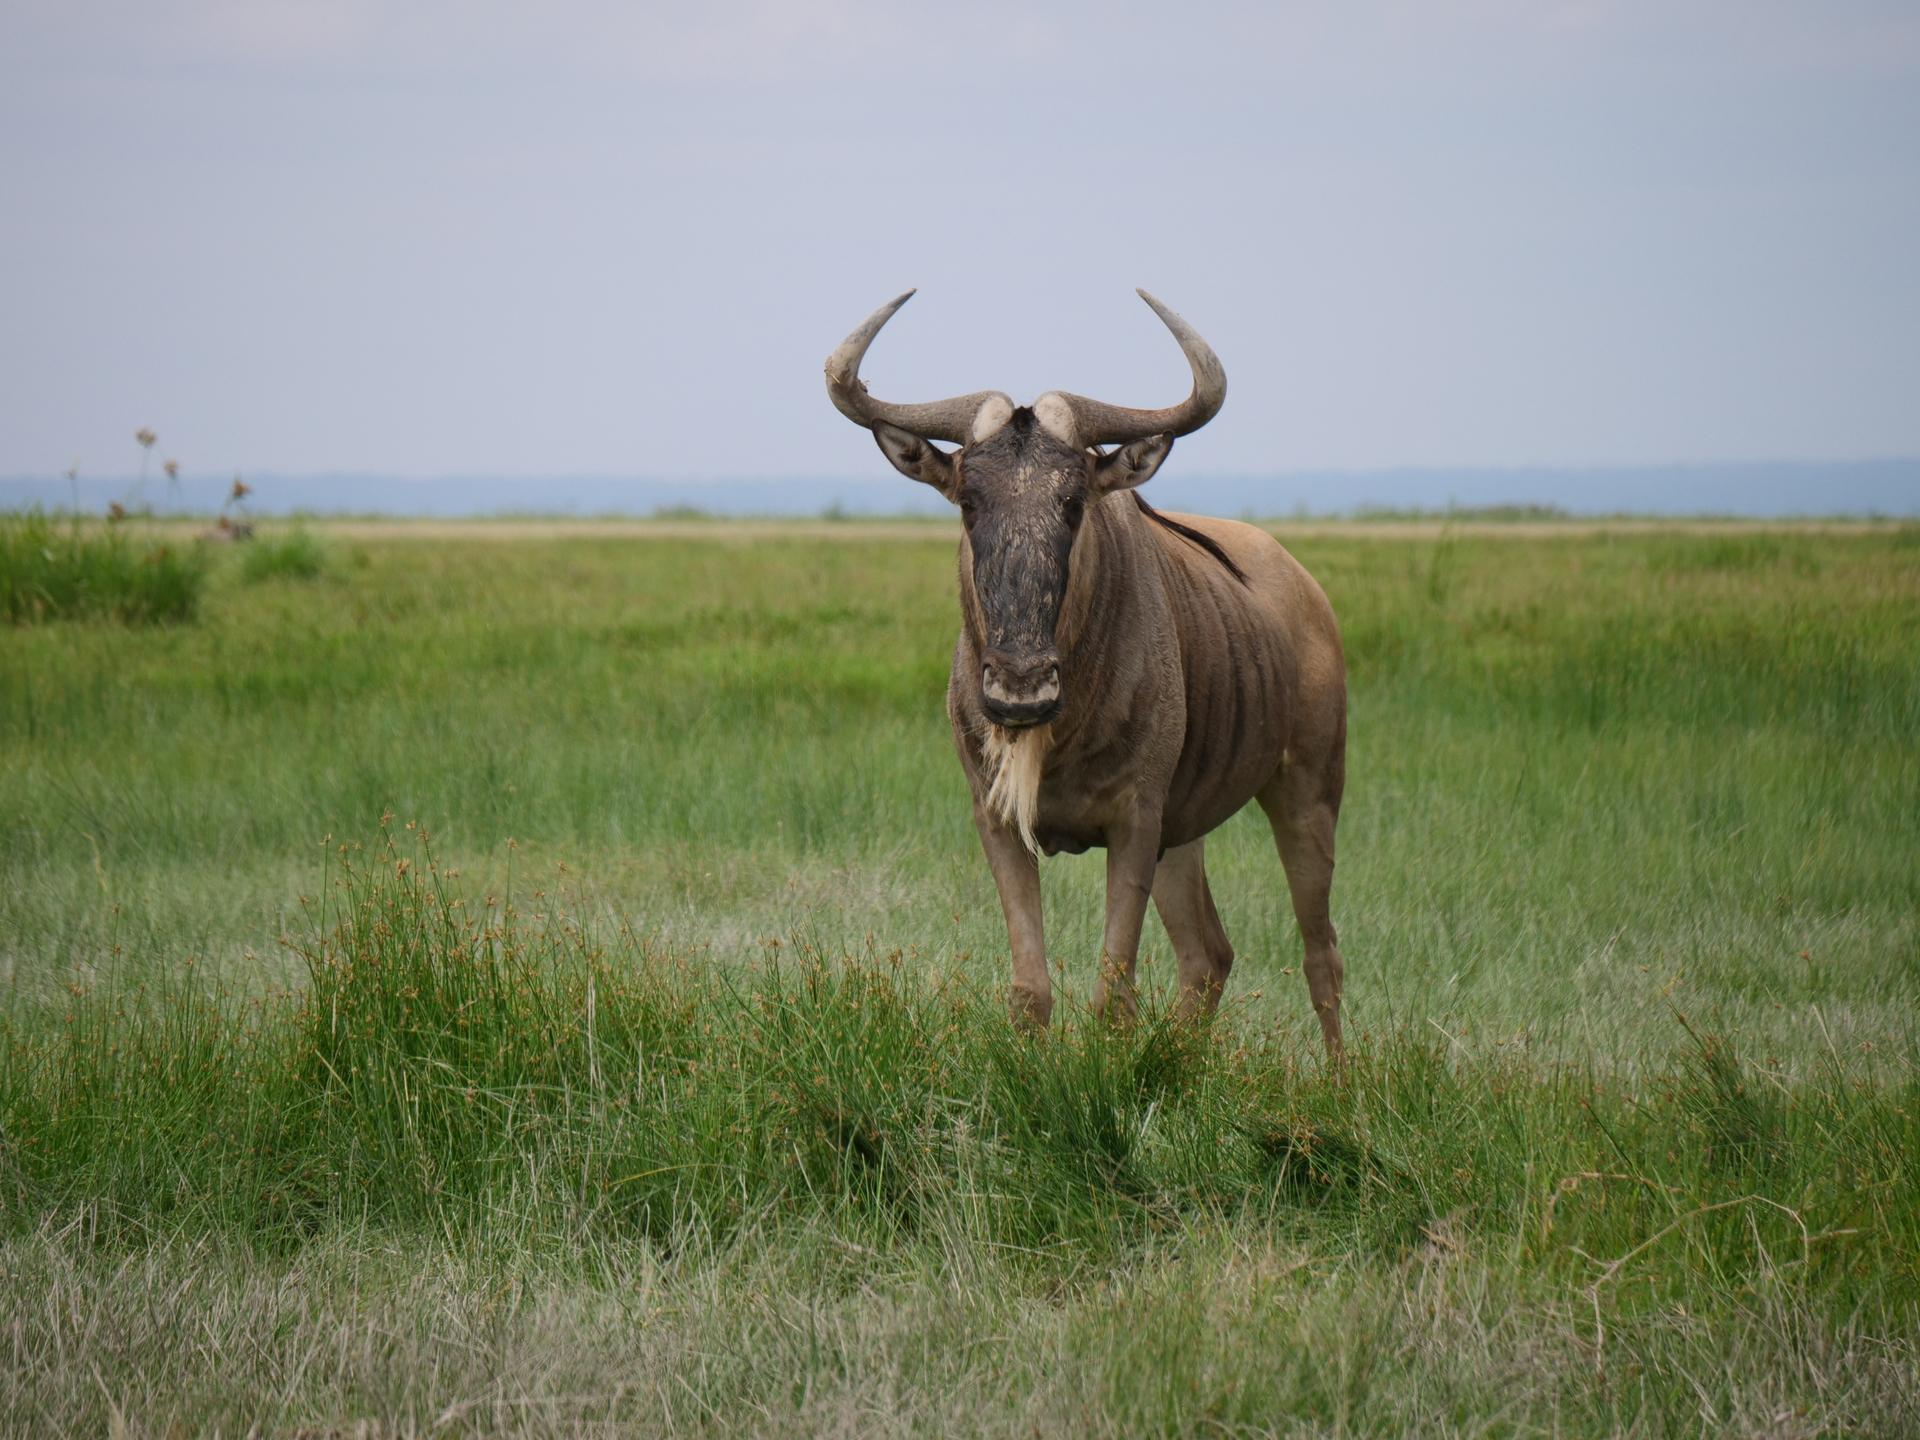 A wildebeest stands in the middle of a grassy field